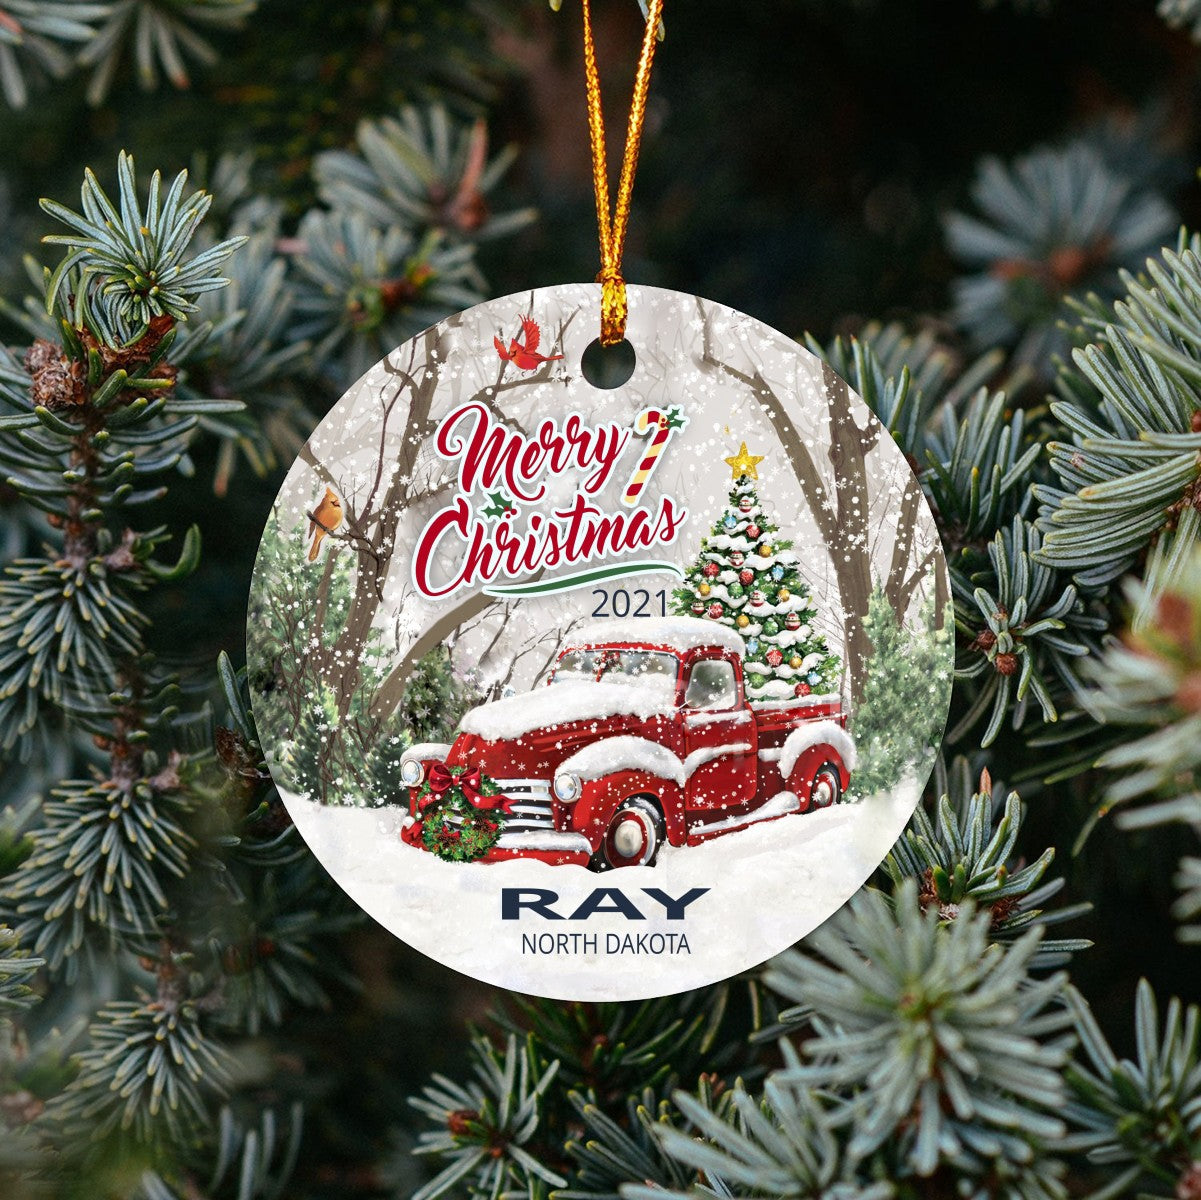 Christmas Tree Ornaments Ray - Ornament With Name City, State Ray North Dakota ND Ornament - Red Truck Xmas Ornaments 3'' Plastic Gift For Family, Friend And Housewarming